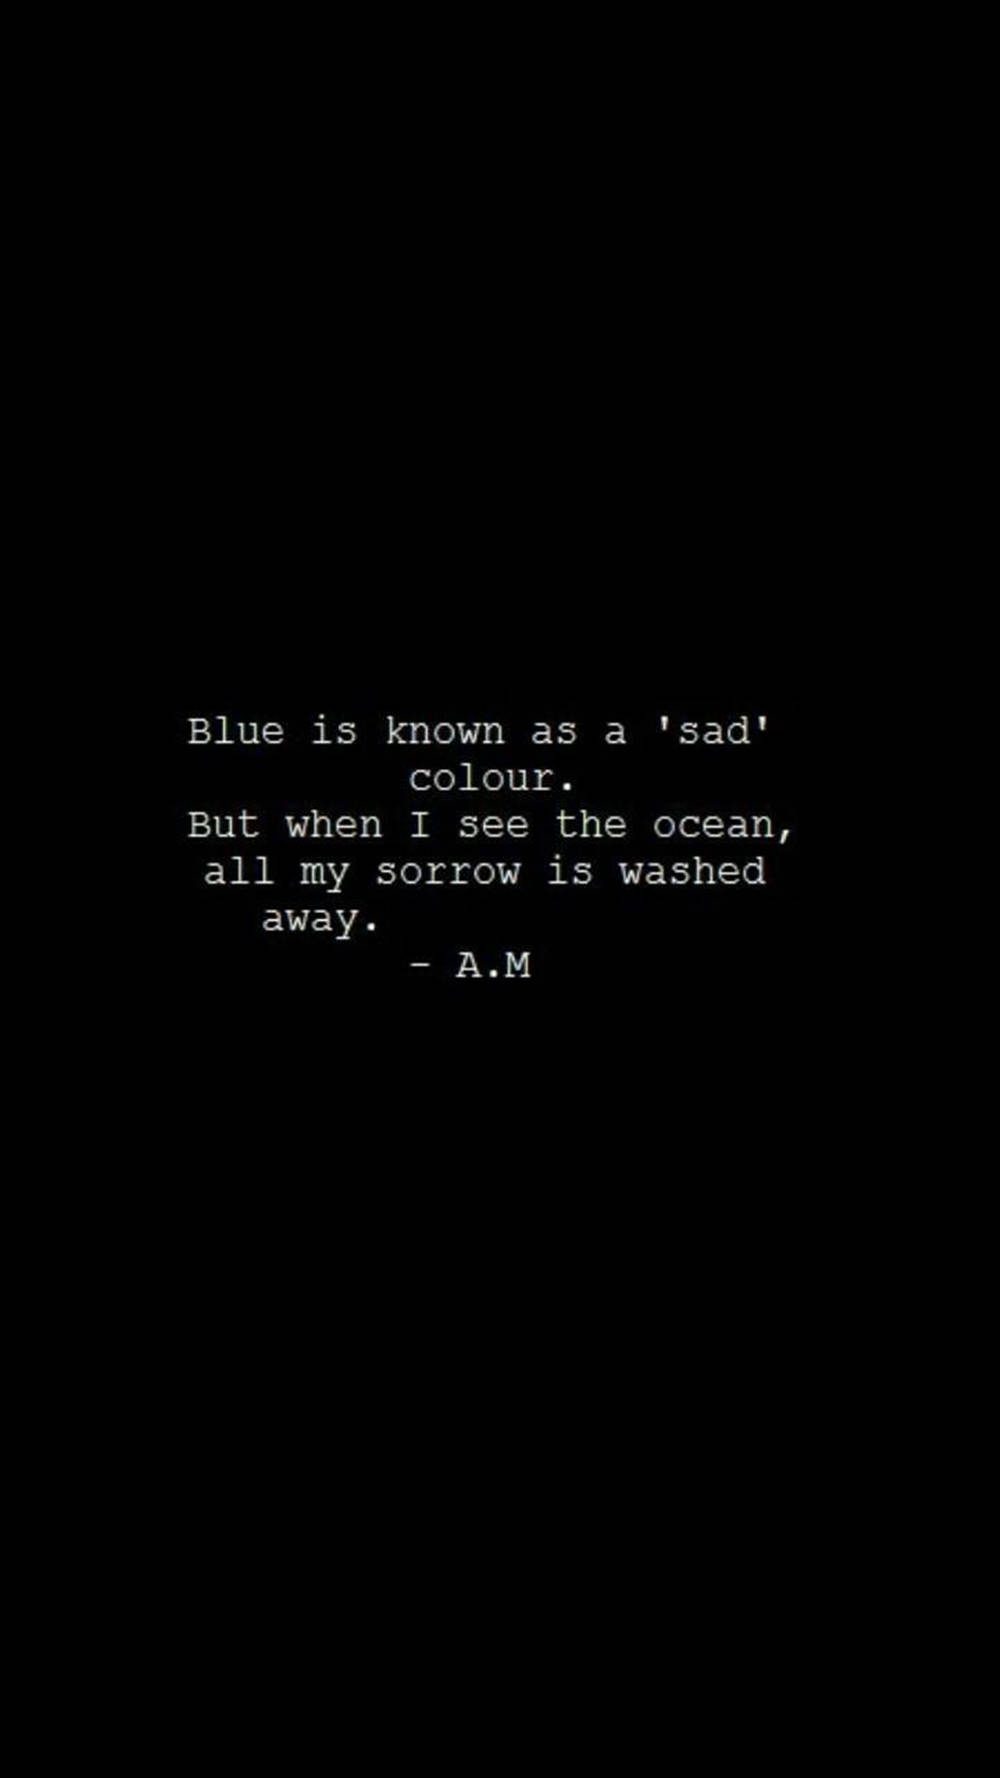 Download Blue Is A Sad Color Aesthetic Black Quotes Wallpaper | Wallpapers .com